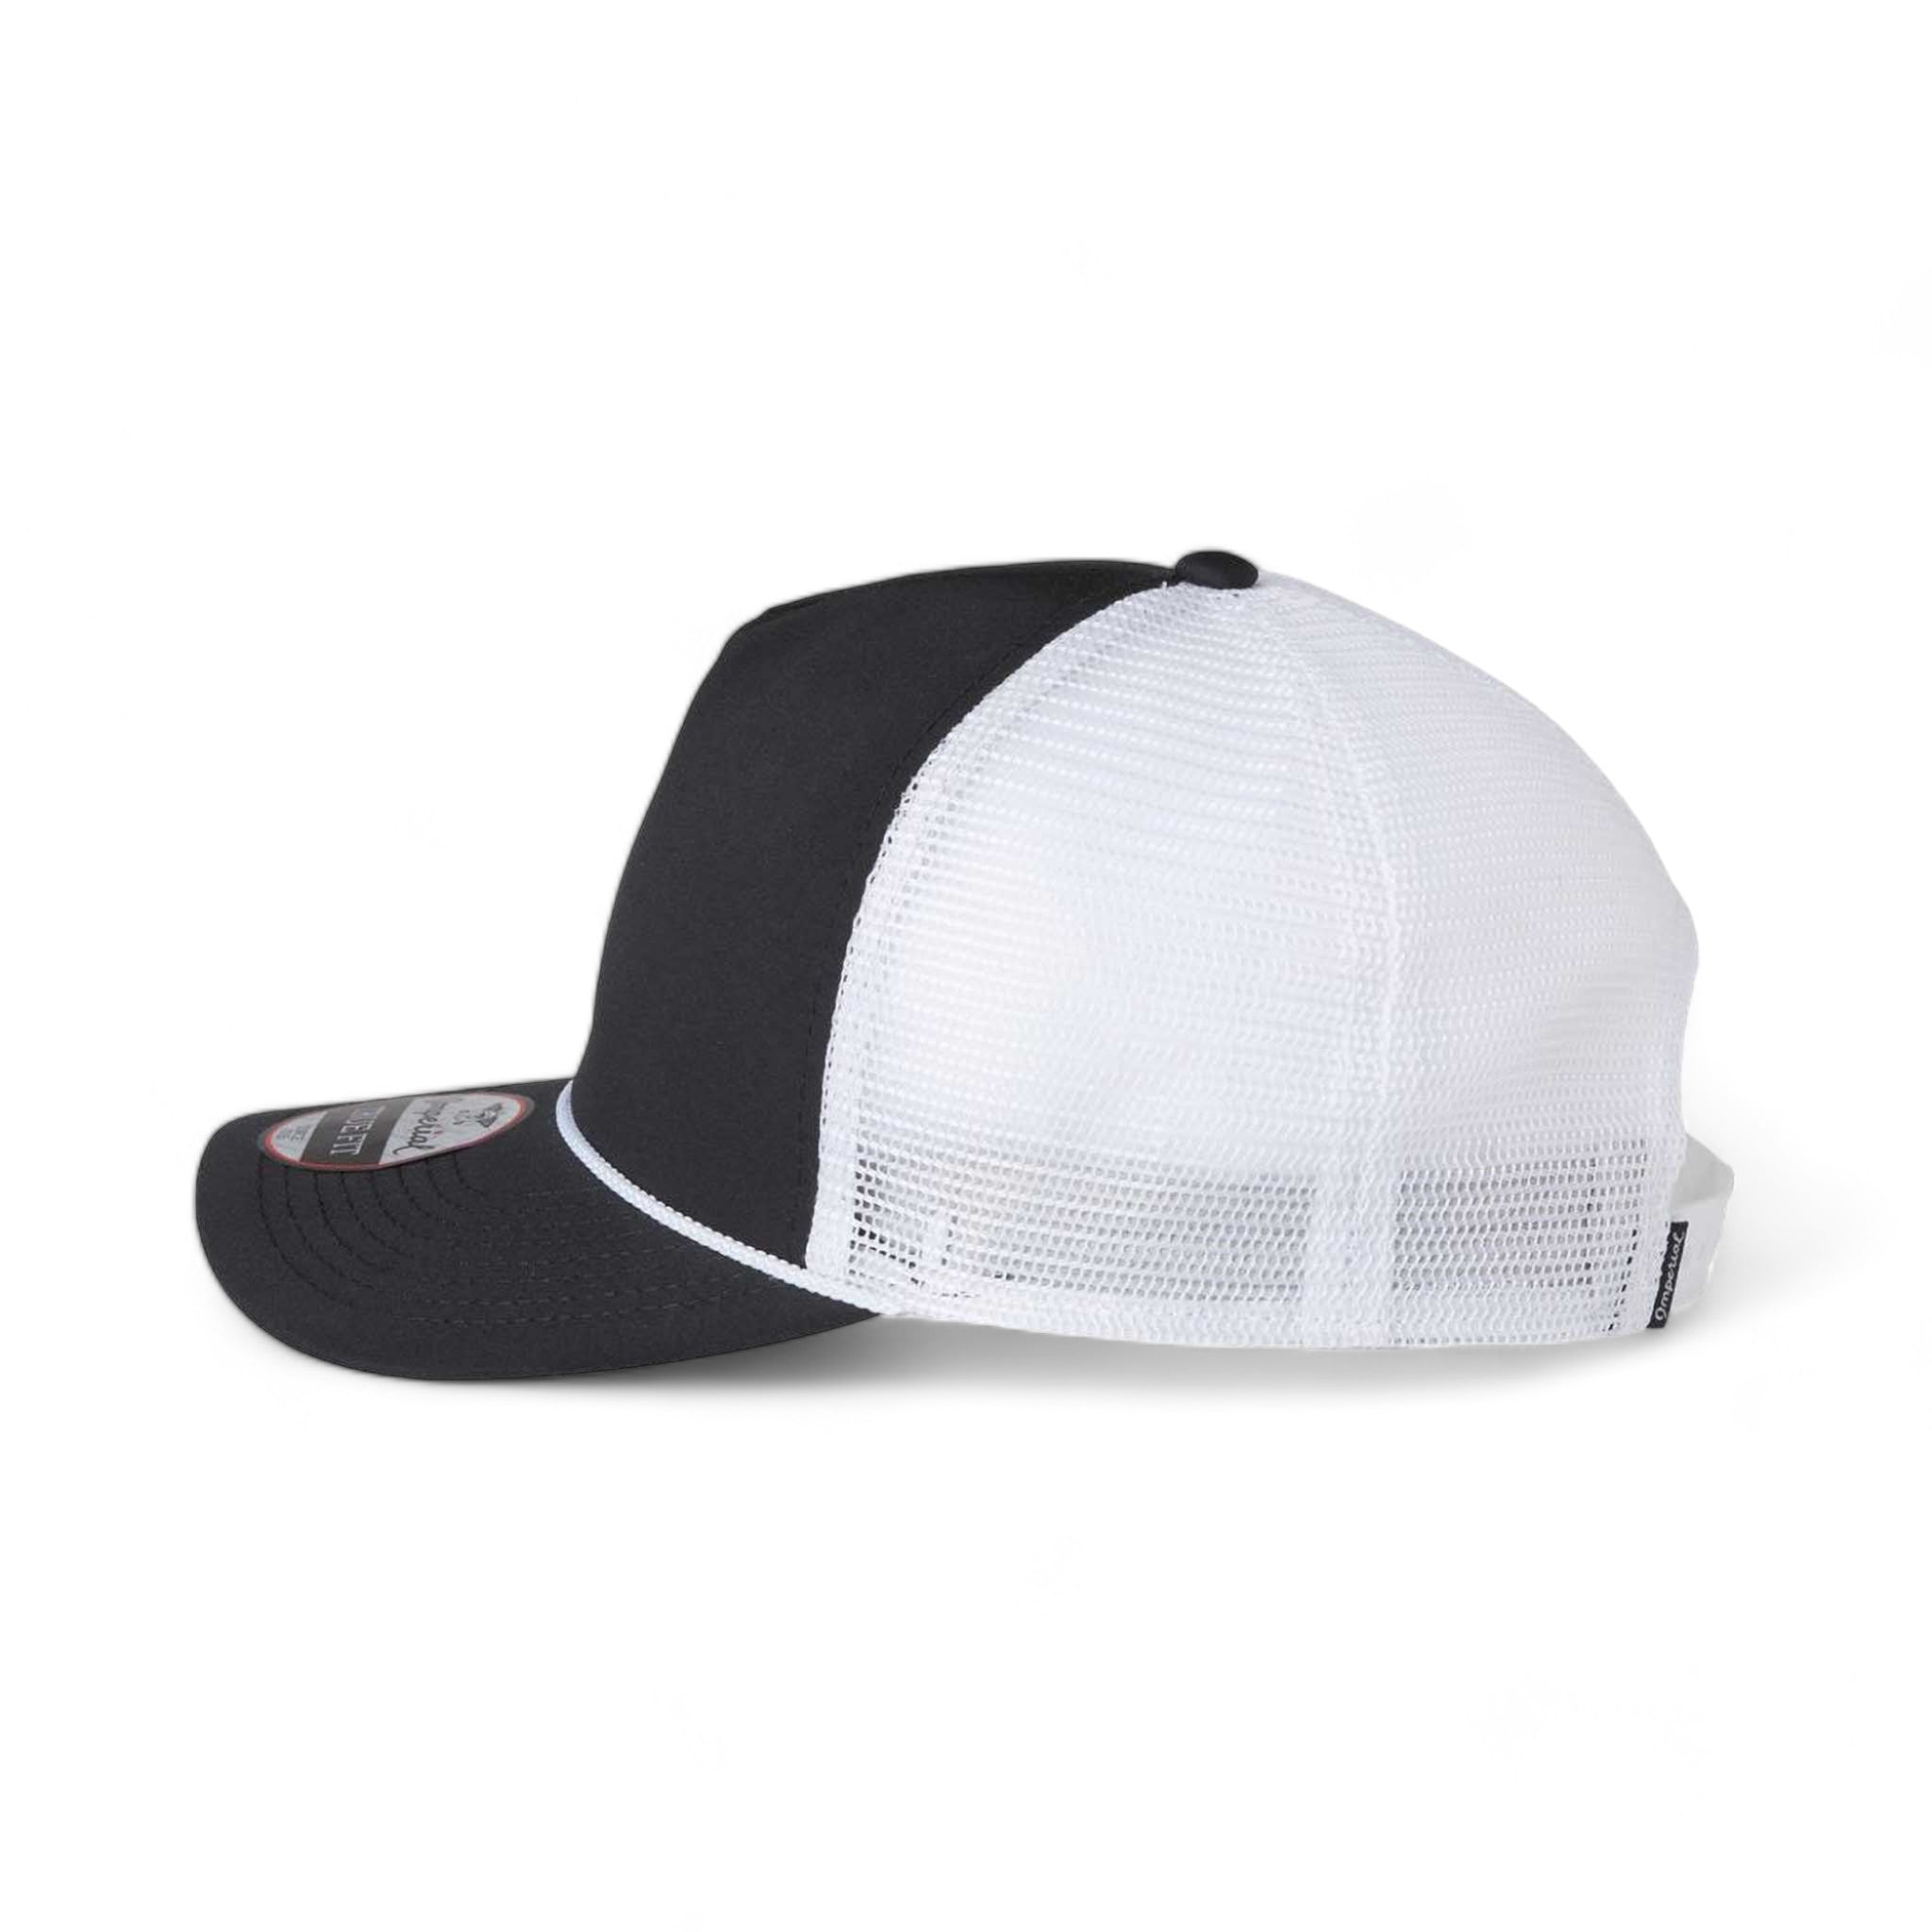 Side view of Imperial 5055 custom hat in black, white and white